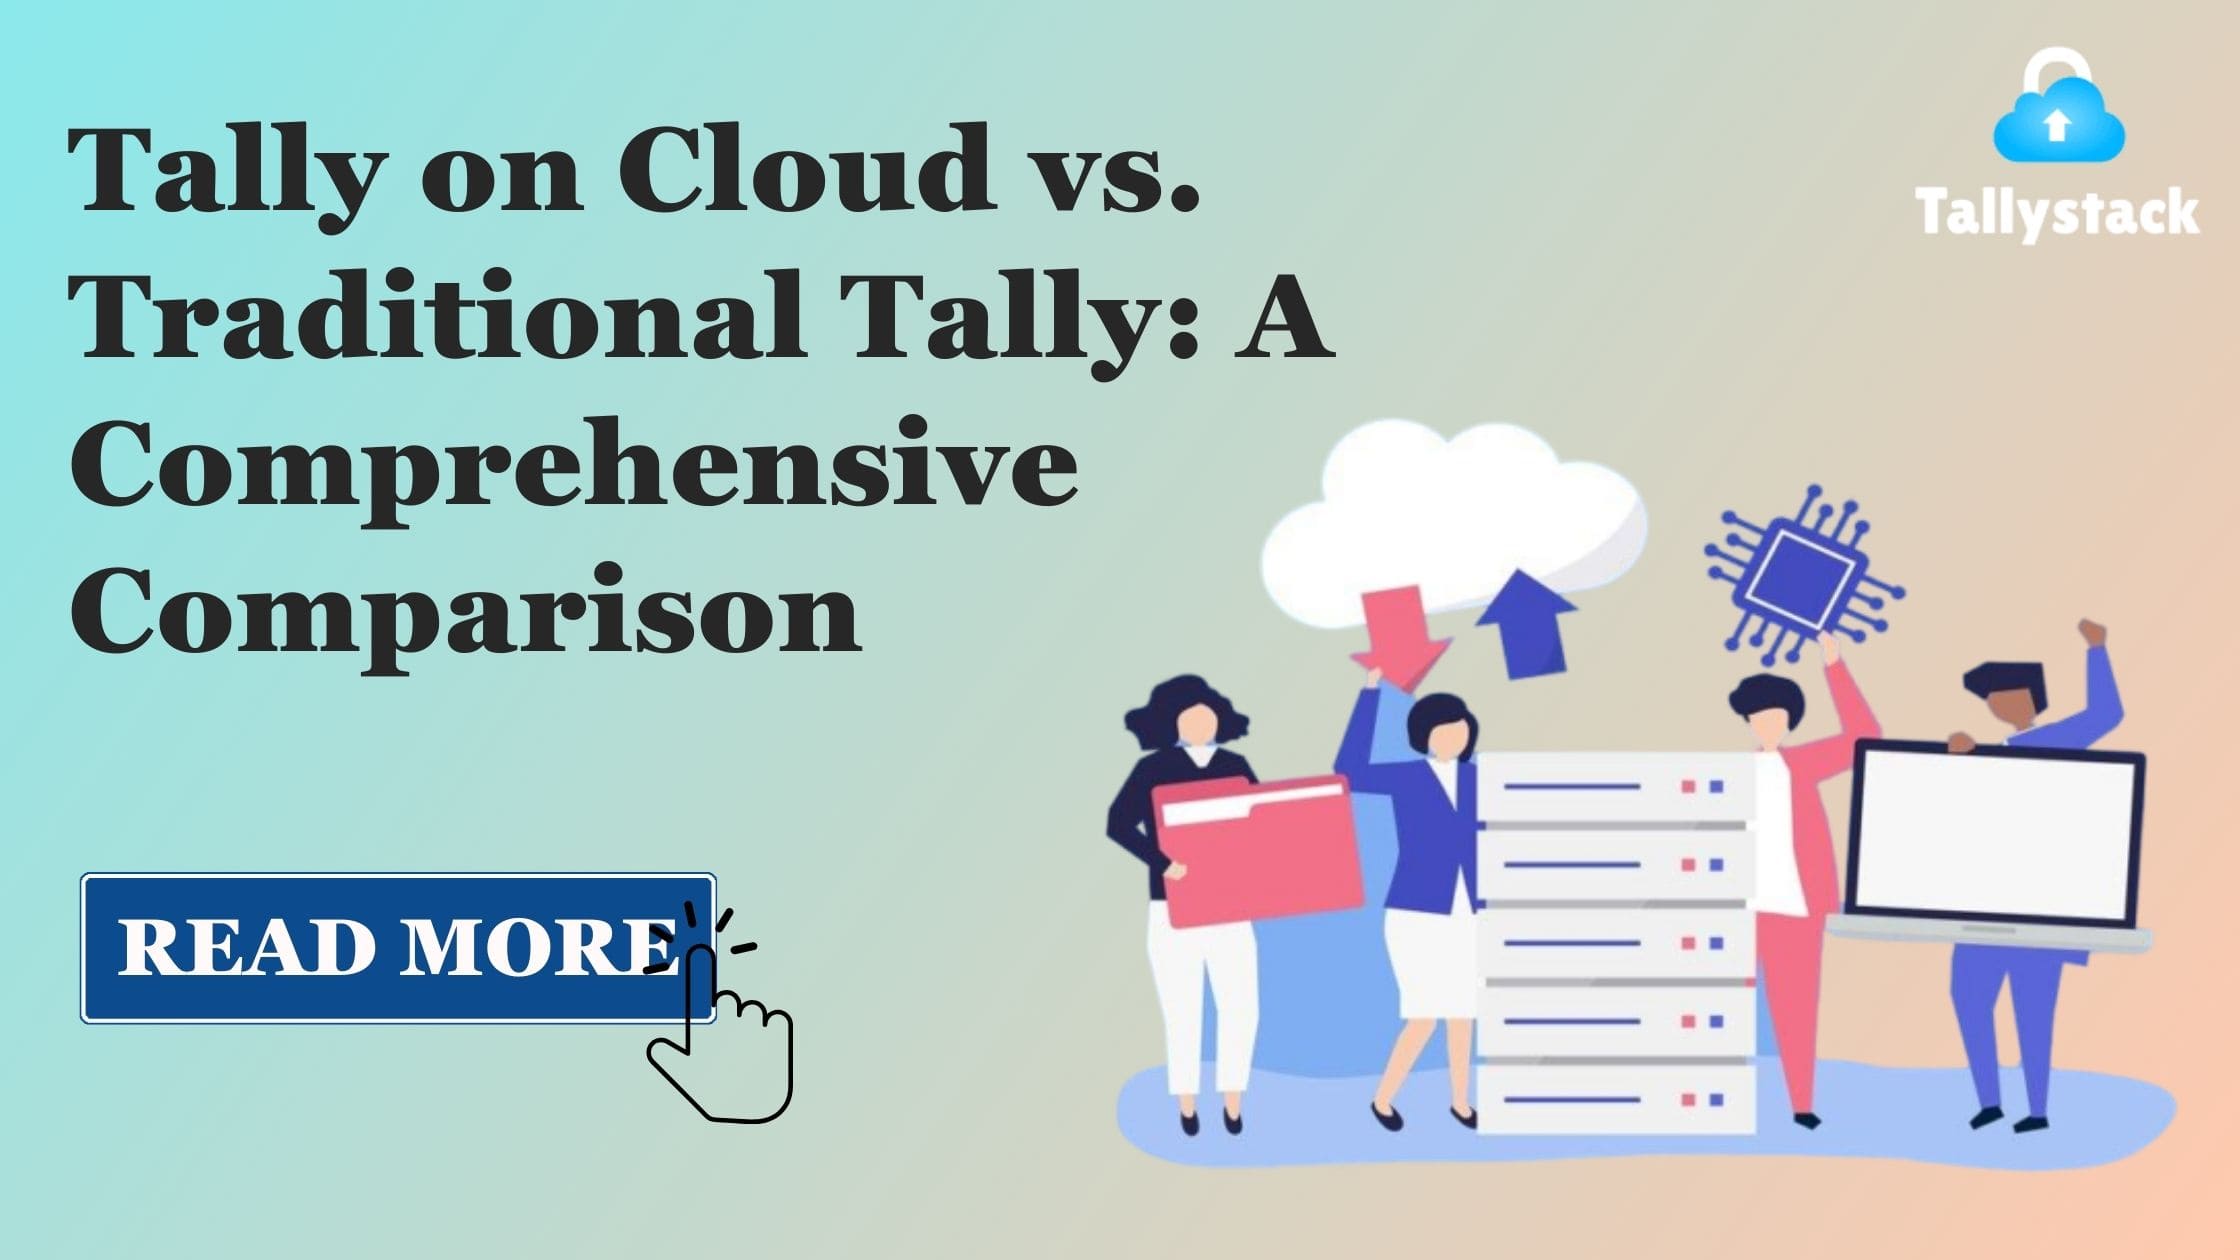 Tally on Cloud vs. Traditional Tally: A comparison of online and offline Tally software solutions.